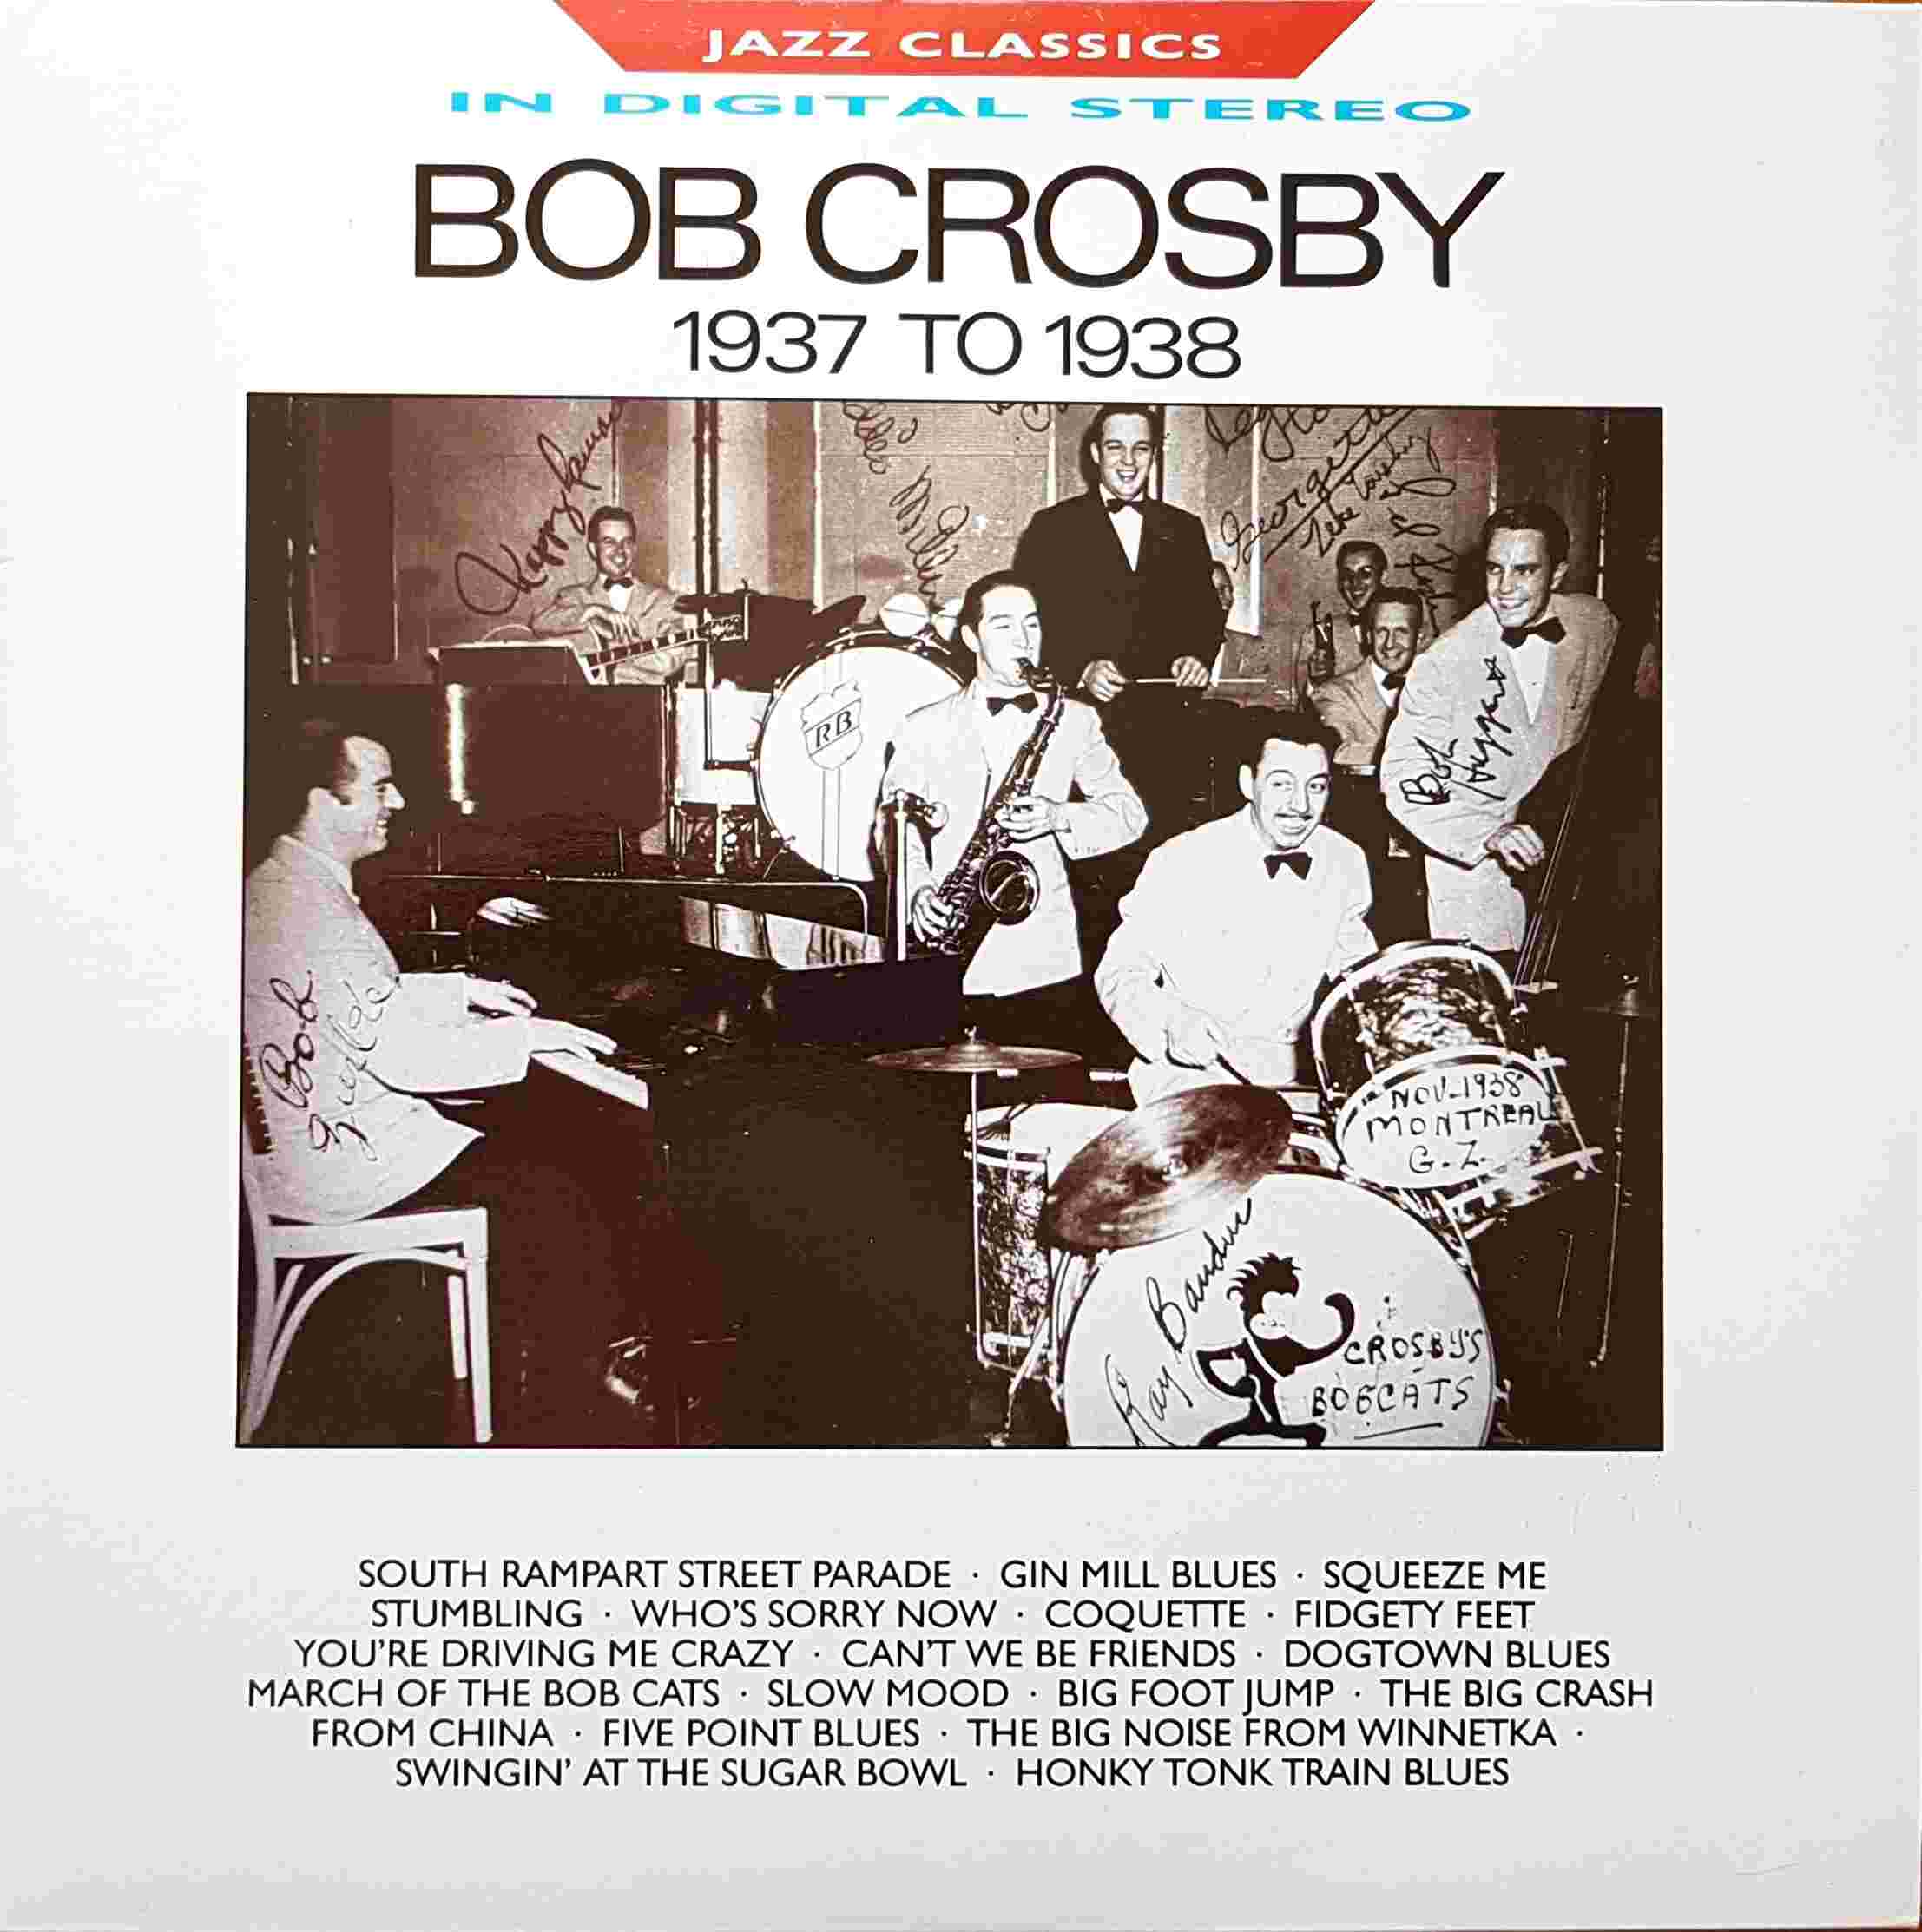 Picture of REB 688 Jazz classics - Bob Crosby by artist Bob Crosby from the BBC albums - Records and Tapes library